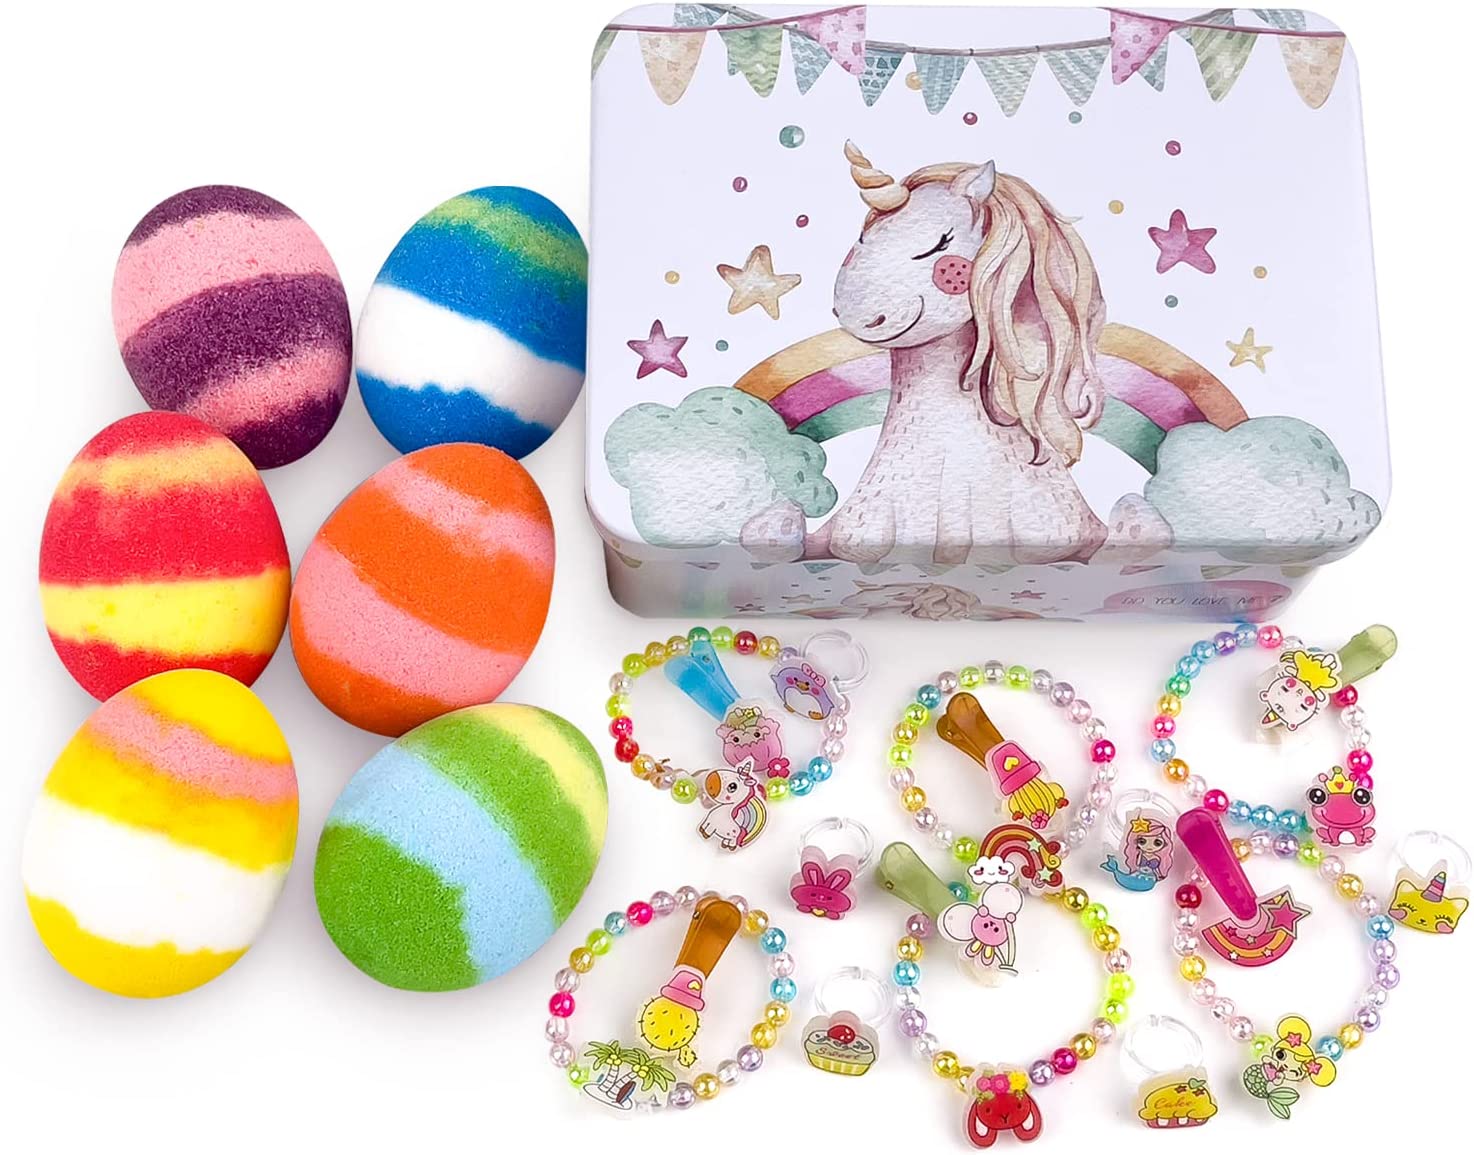 Wholesale Bath Bombs With Jewelry Toys For Kids